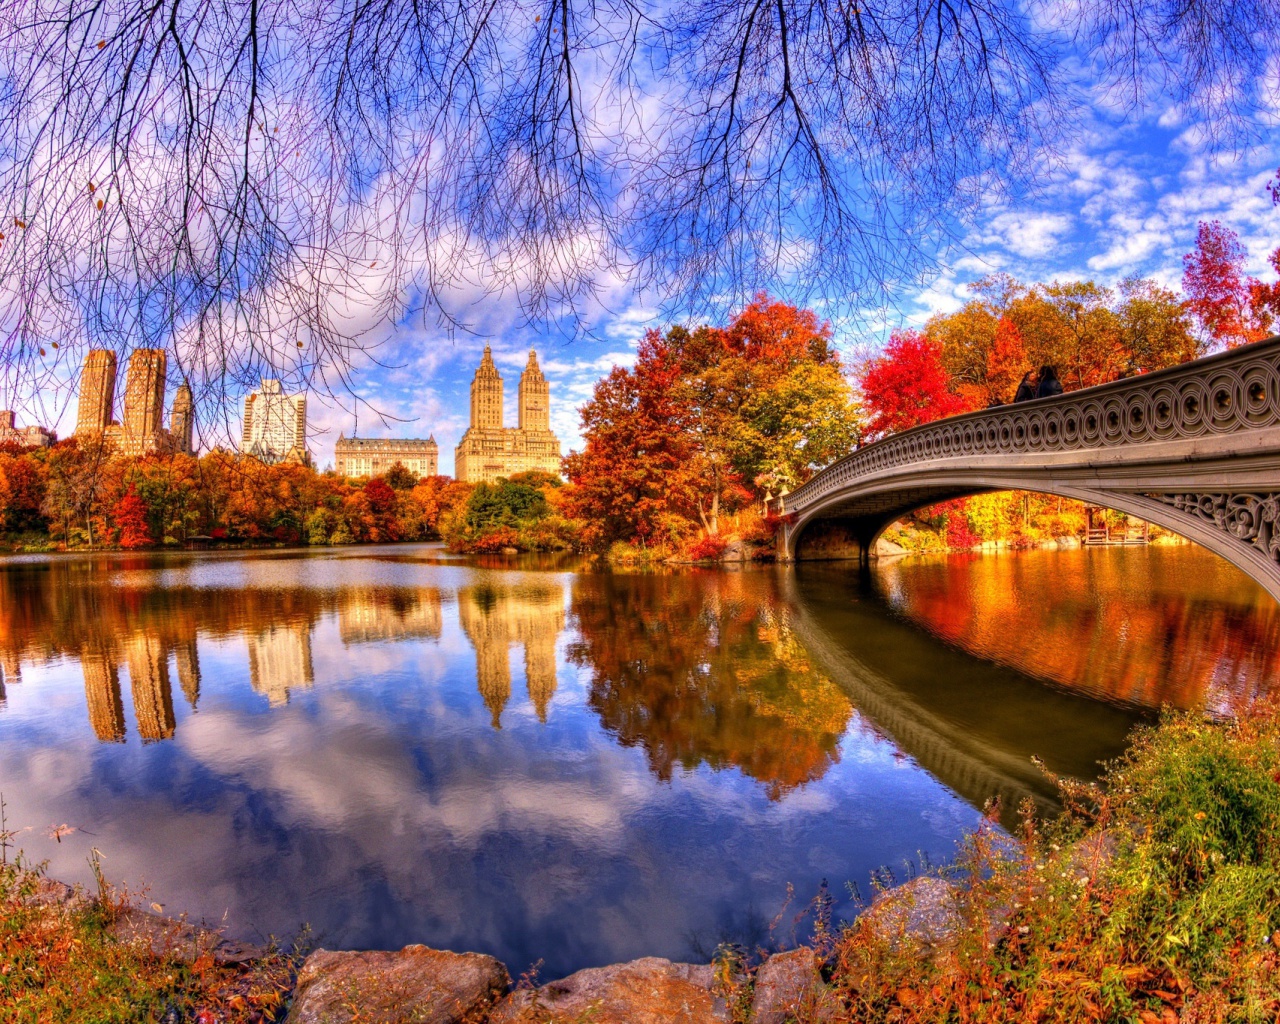 Architecture Reflection in Central Park screenshot #1 1280x1024